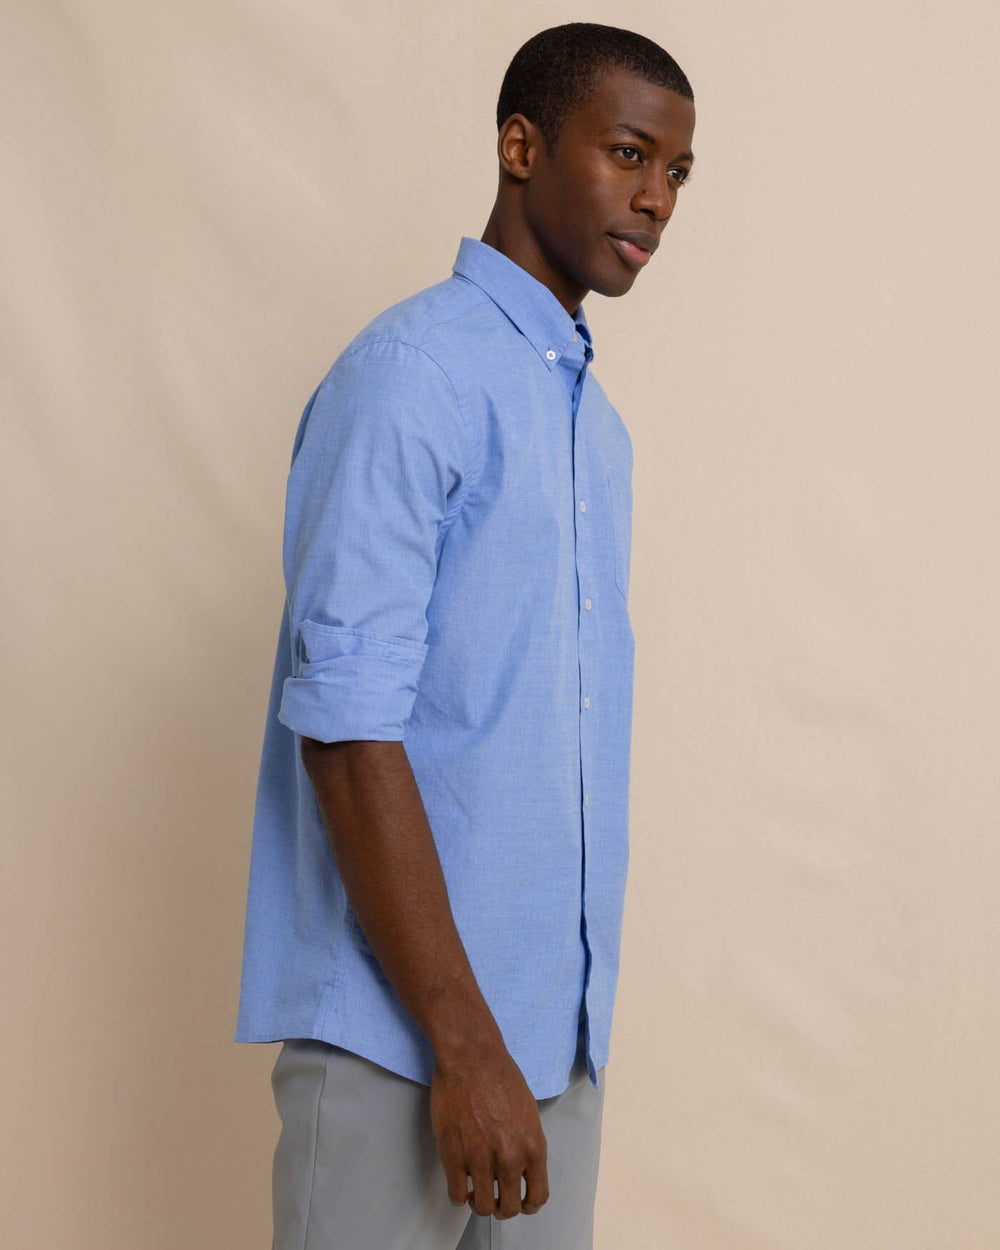 The front view of the Men's Blue Sullivans Solid Button Down Shirt by Southern Tide - Sail Blue